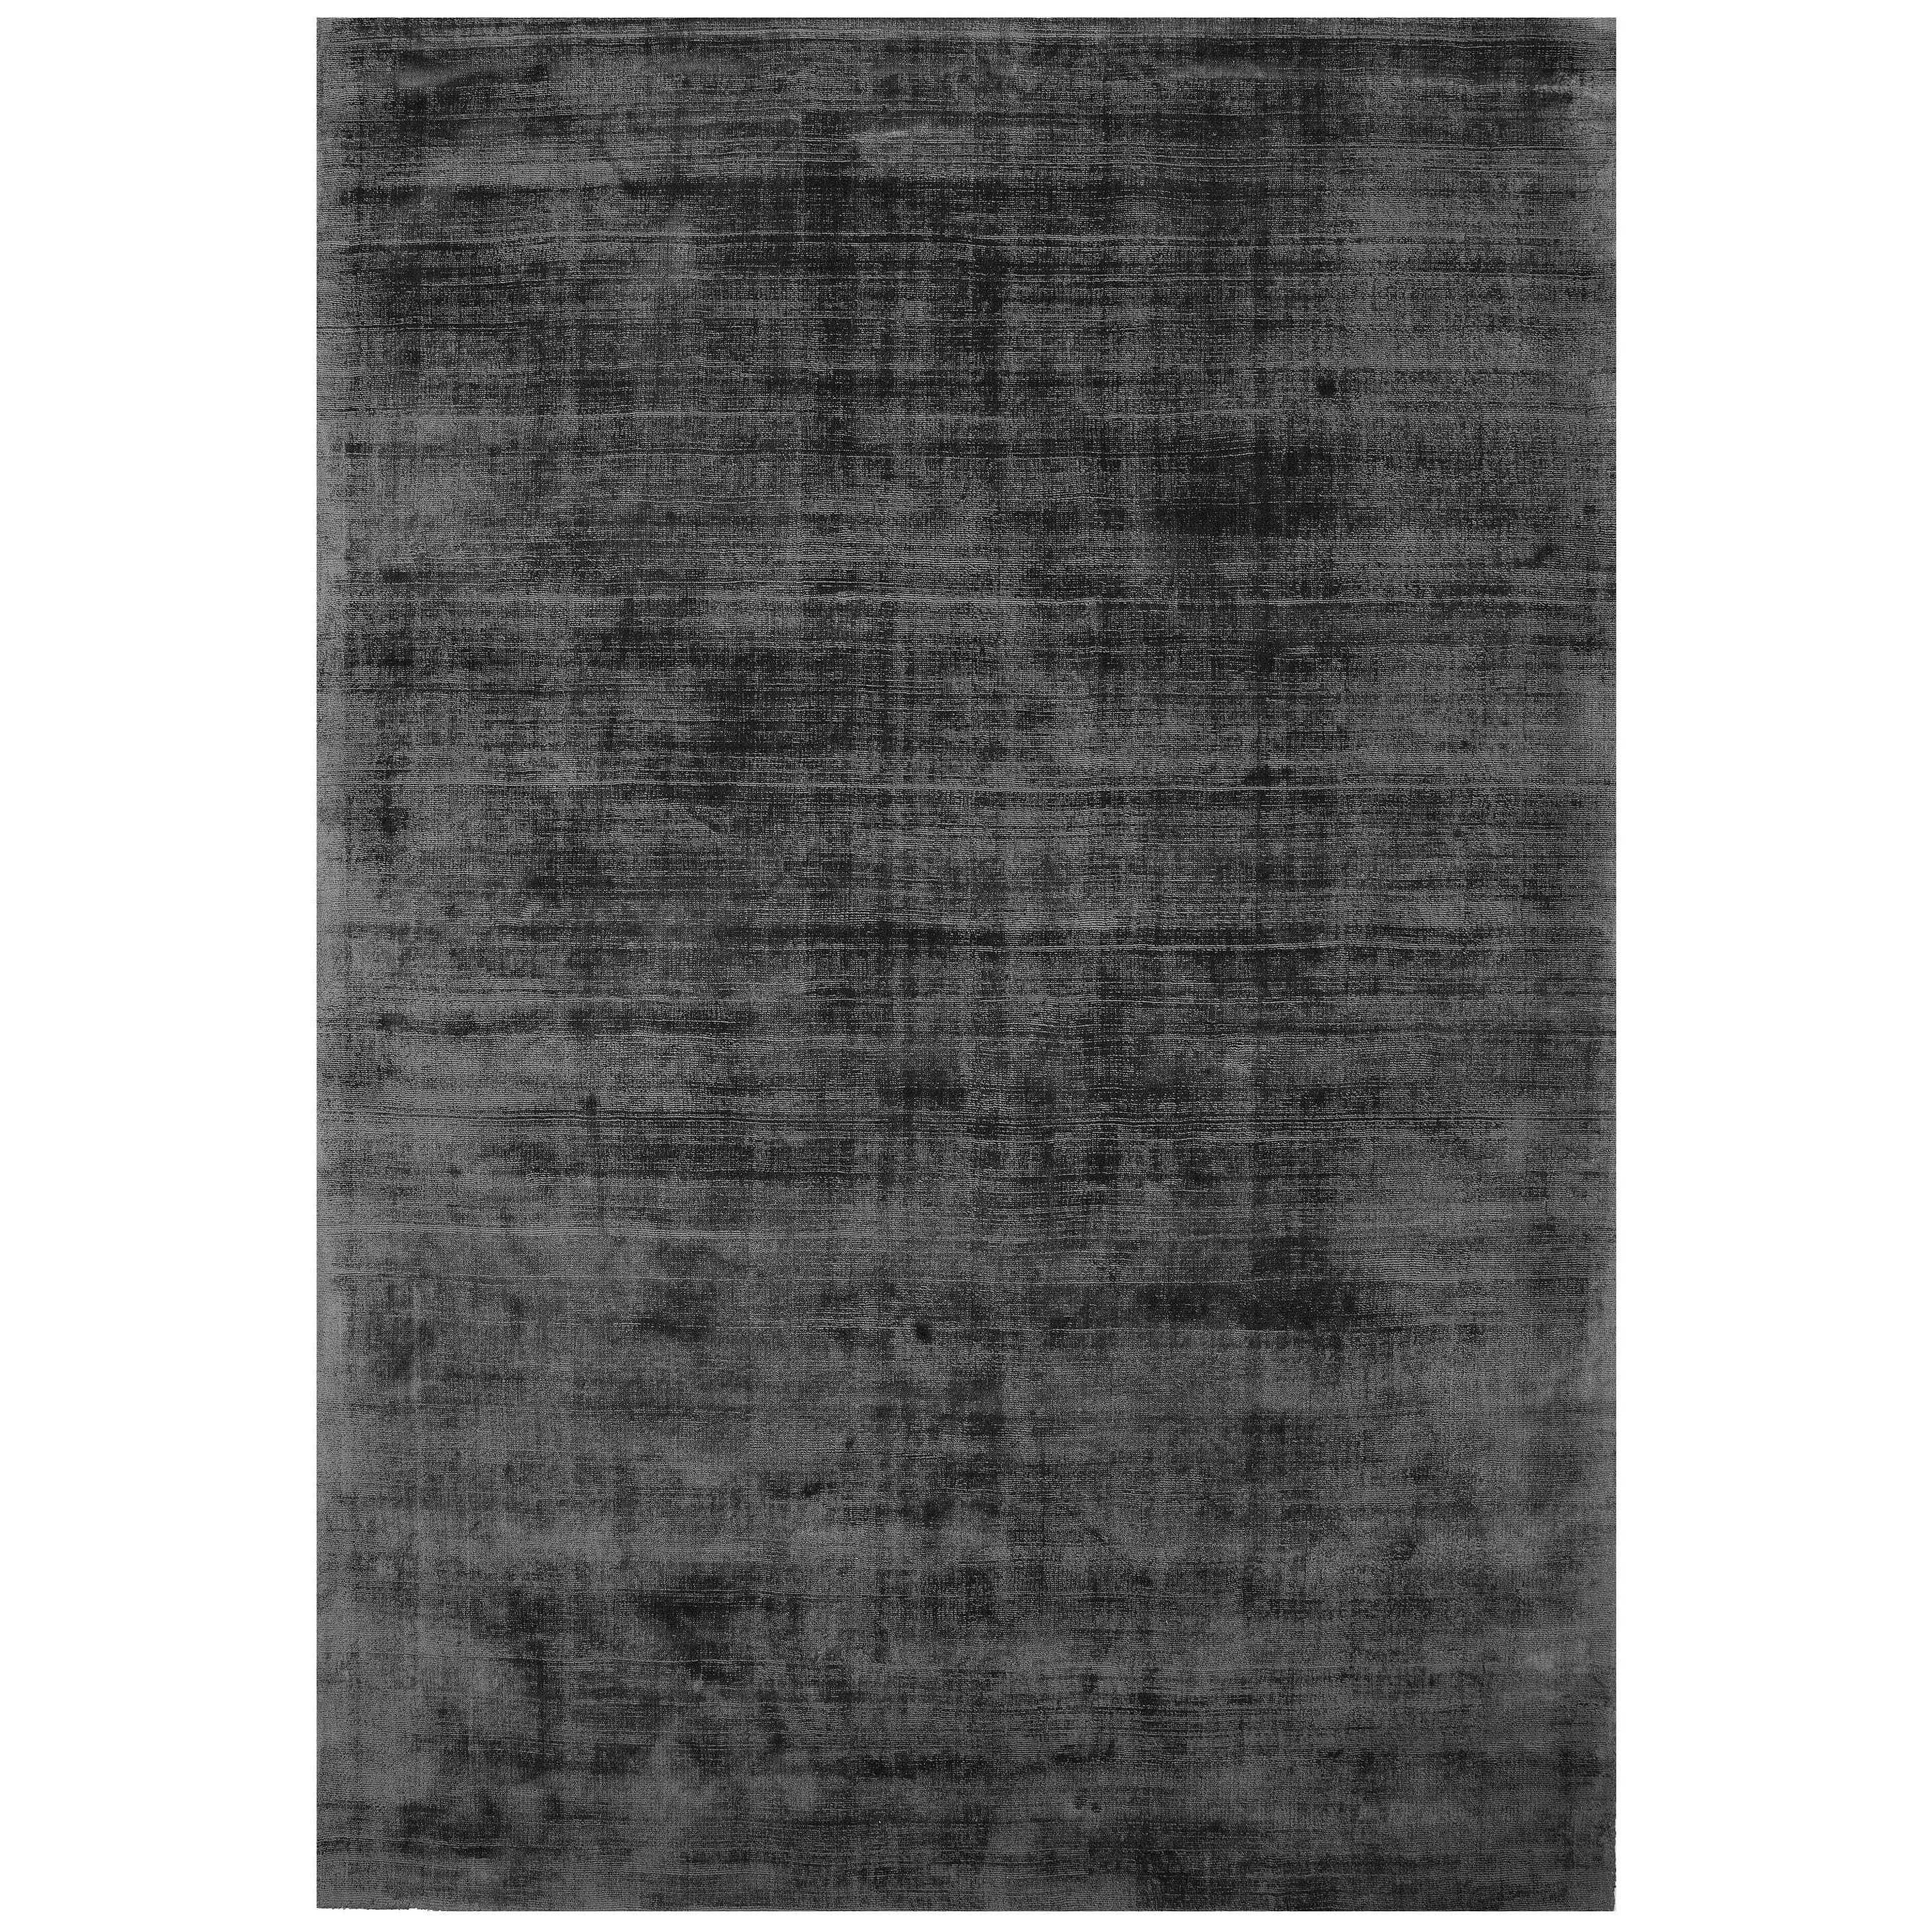 Asiatic Carpets Blade Hand Woven Rug Charcoal - 120 x 170cm - image 1